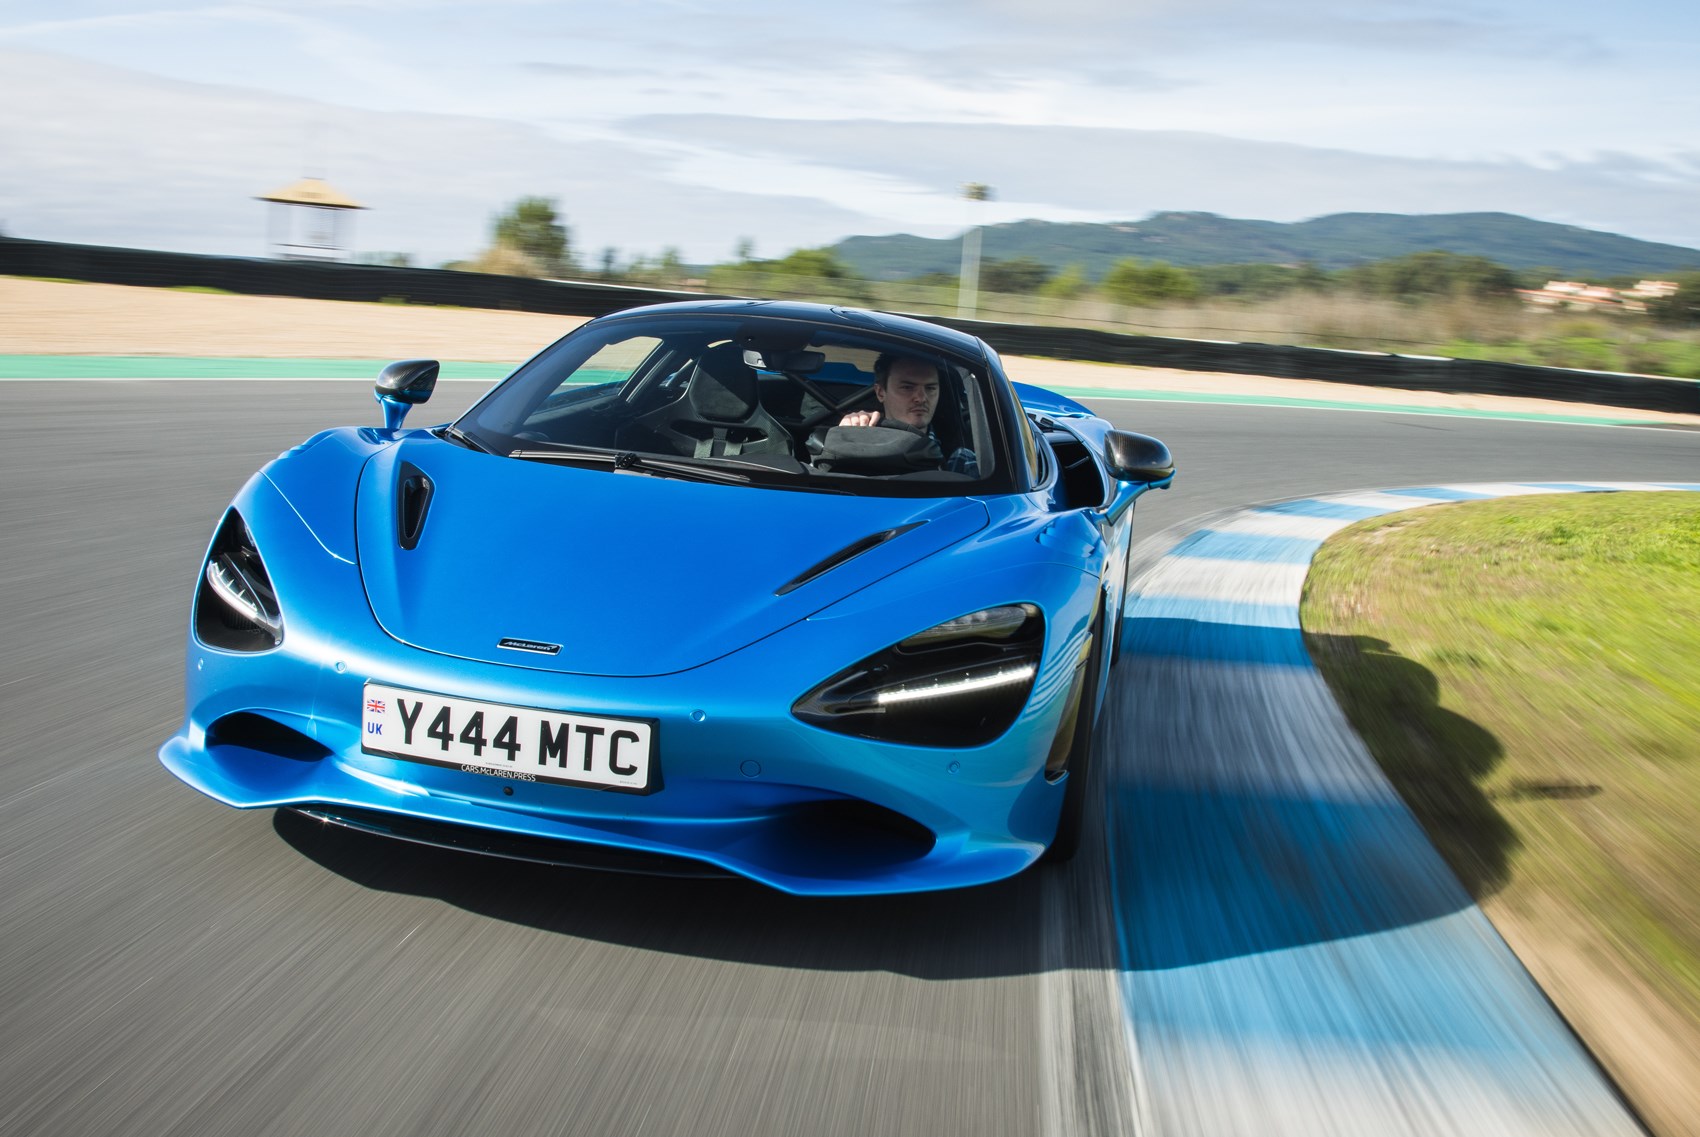 McLaren 720S: 5 Reasons Why It's Still Today's Greatest Supercar